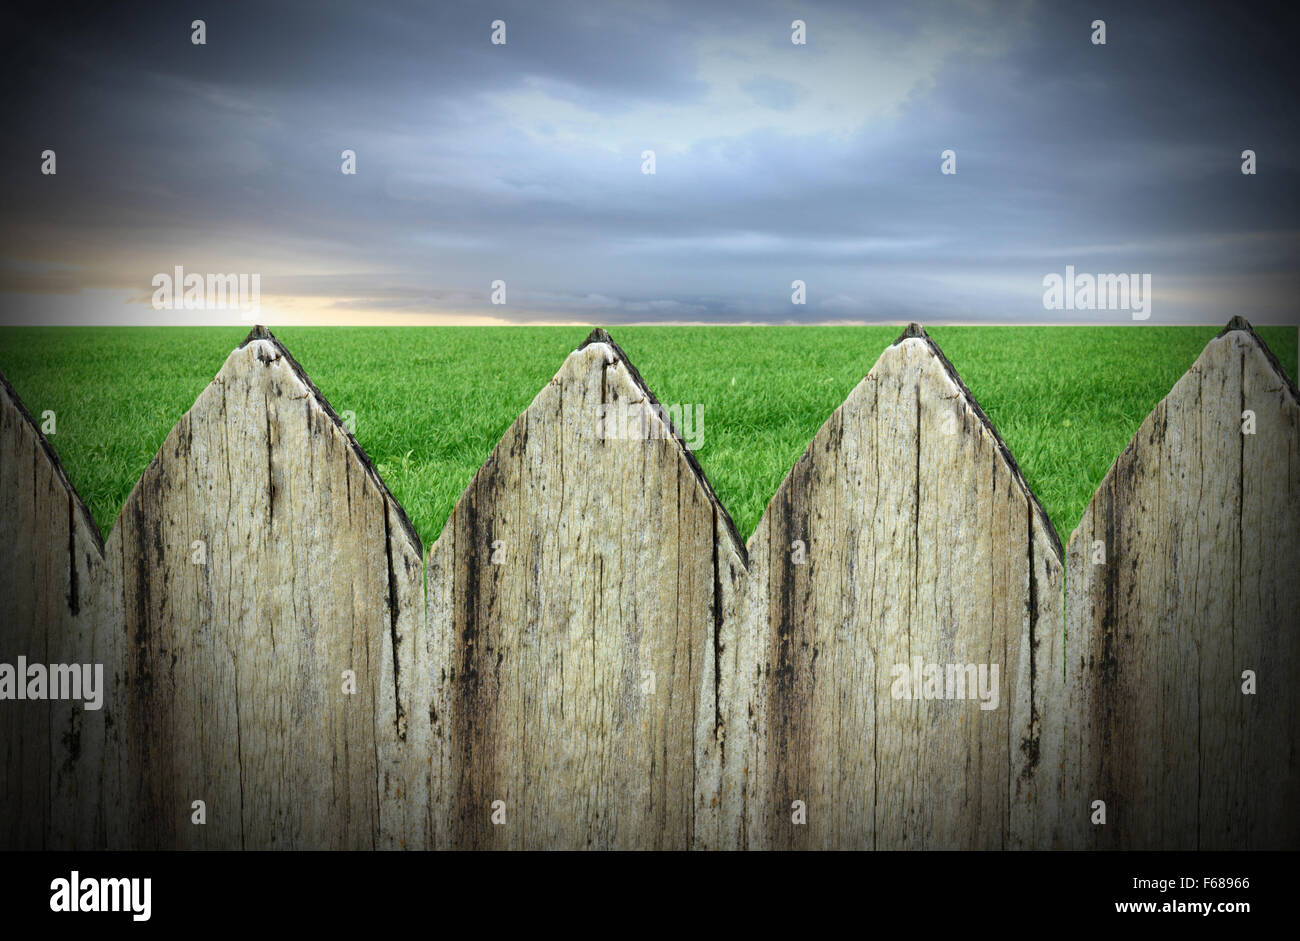 old picket fence in the foreground with lawn behind and grey sky Stock Photo